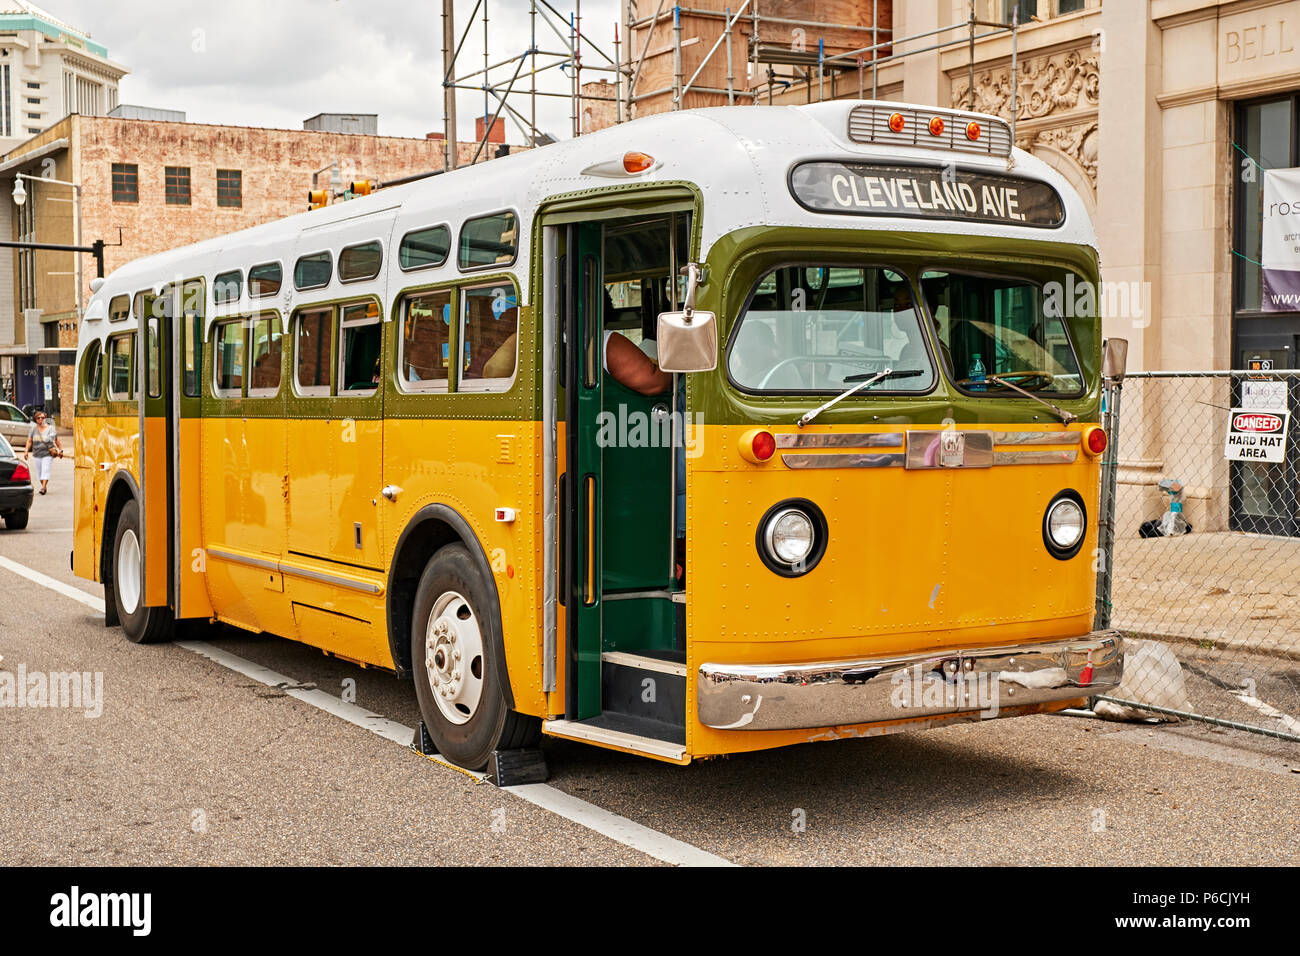 Replica of the Rosa Park's bus she was arrested from during the civil rights struggles in the 1960s in Montgomery Alabama, USA. Stock Photo